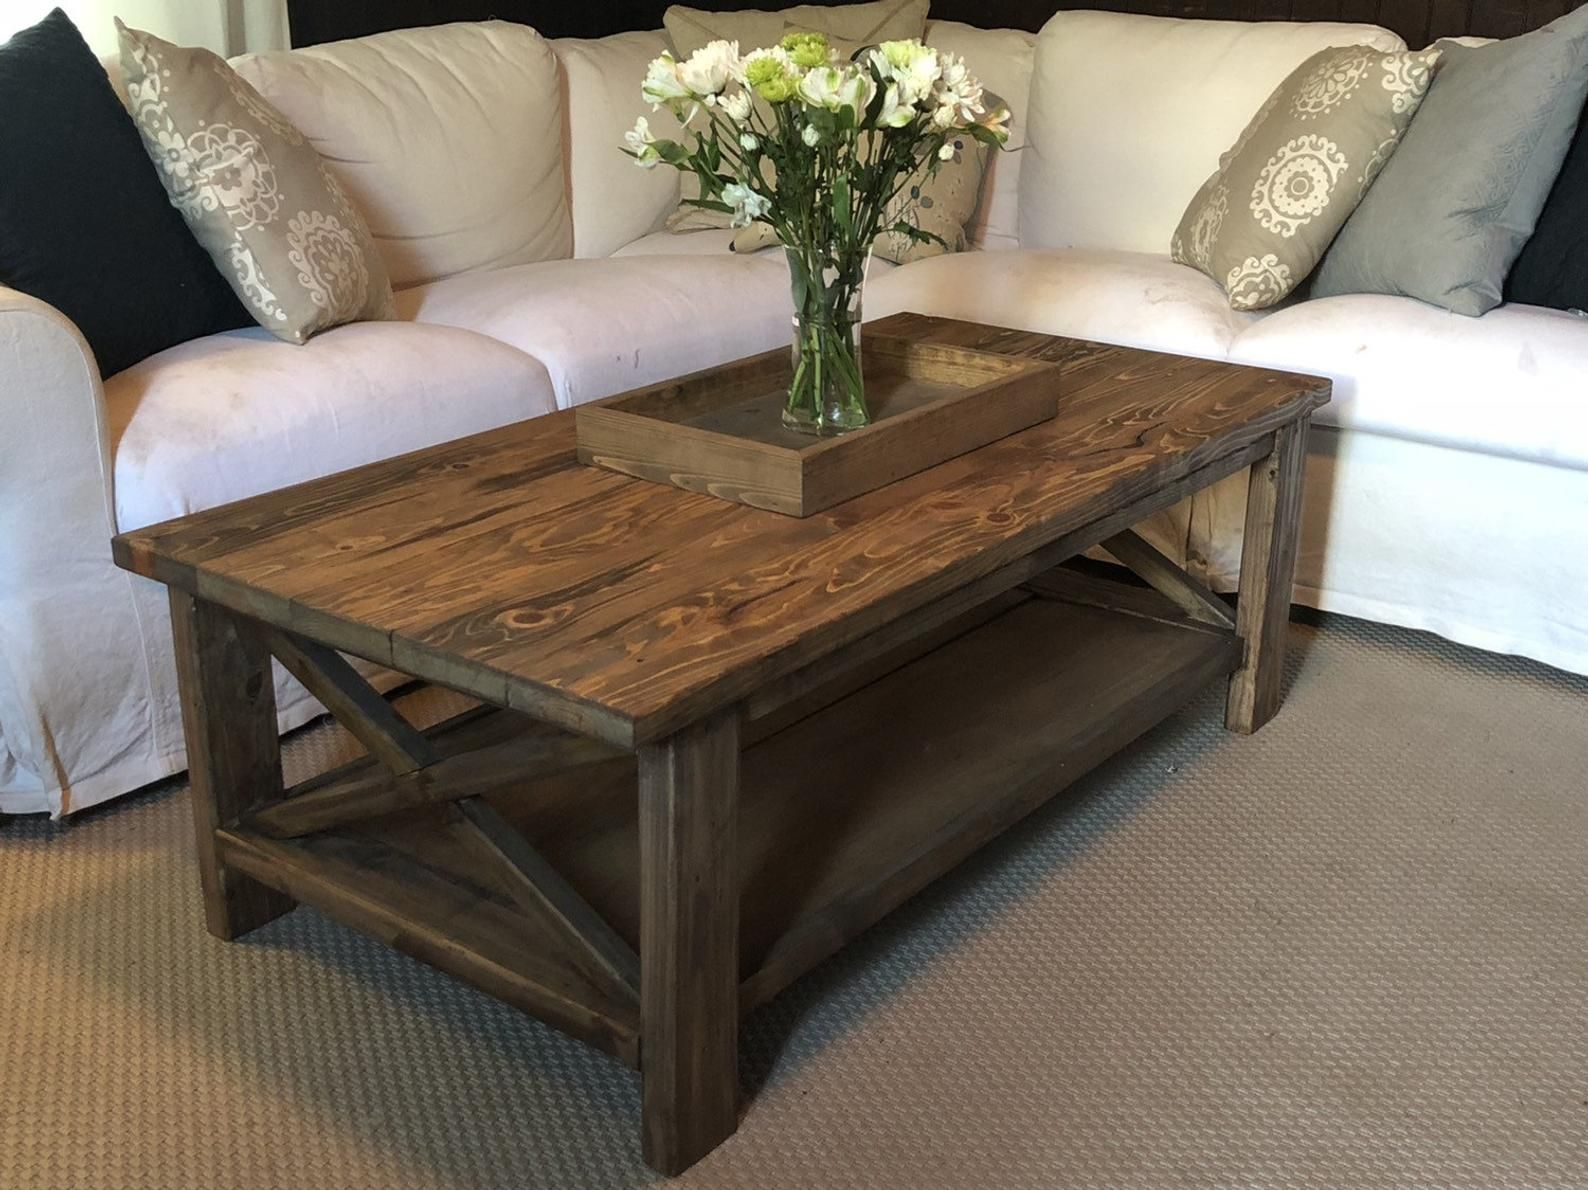 Rustic Farmhouse Style Coffee Table | Etsy In 2021 Regarding Rustic Oak And Black Coffee Tables (View 6 of 15)